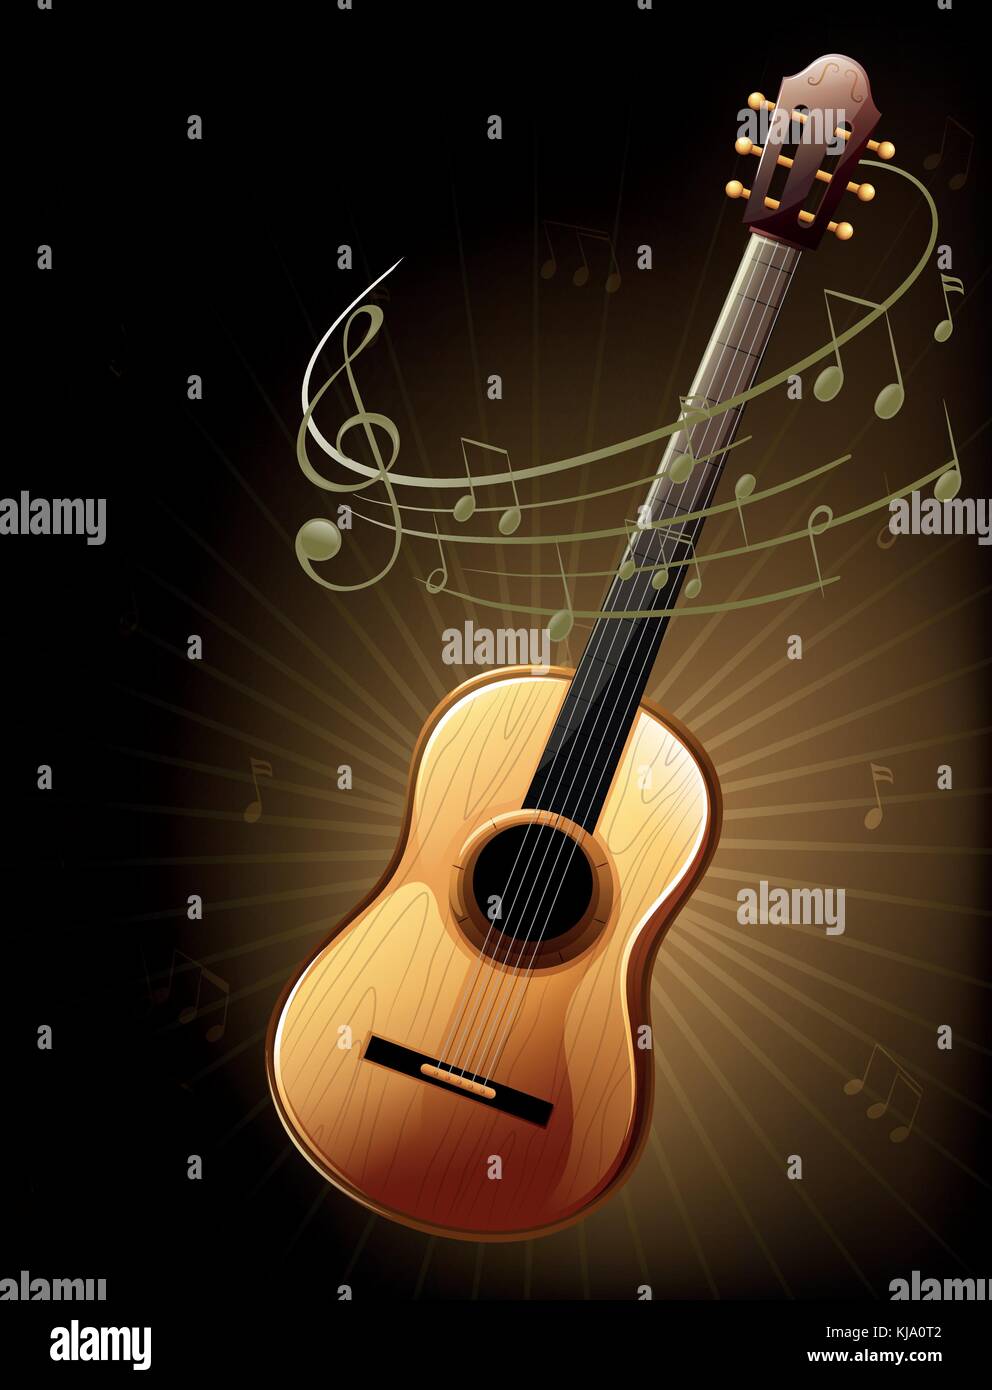 Illustration of a brown guitar with musical notes Stock Vector